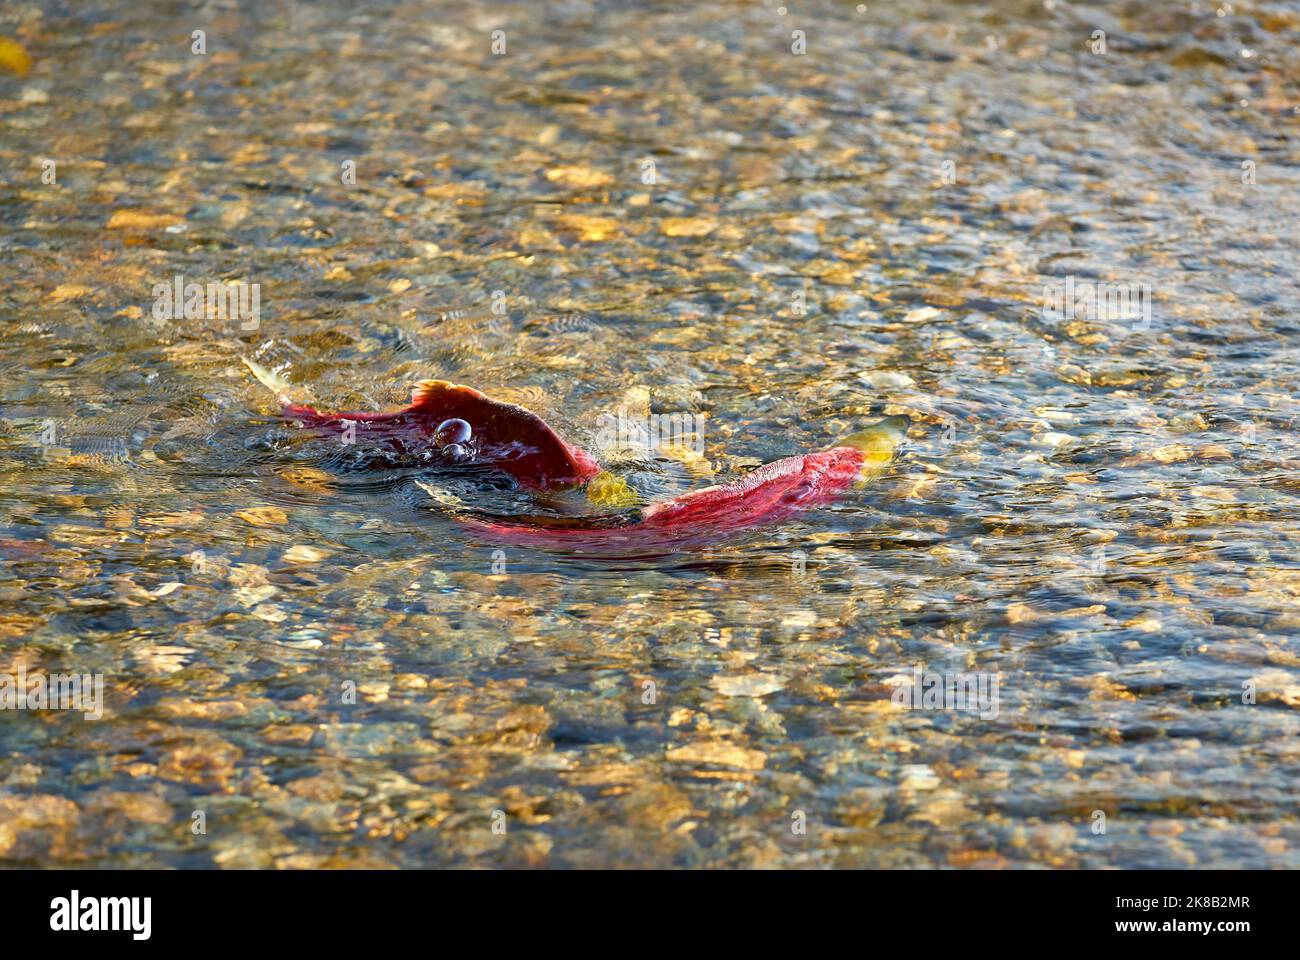 A Pair of Spawning Sockeye Salmon. A pair of Sockeye salmon ready to spawn in the shallows of the Adams River, British Columbia, Canada. Stock Photo